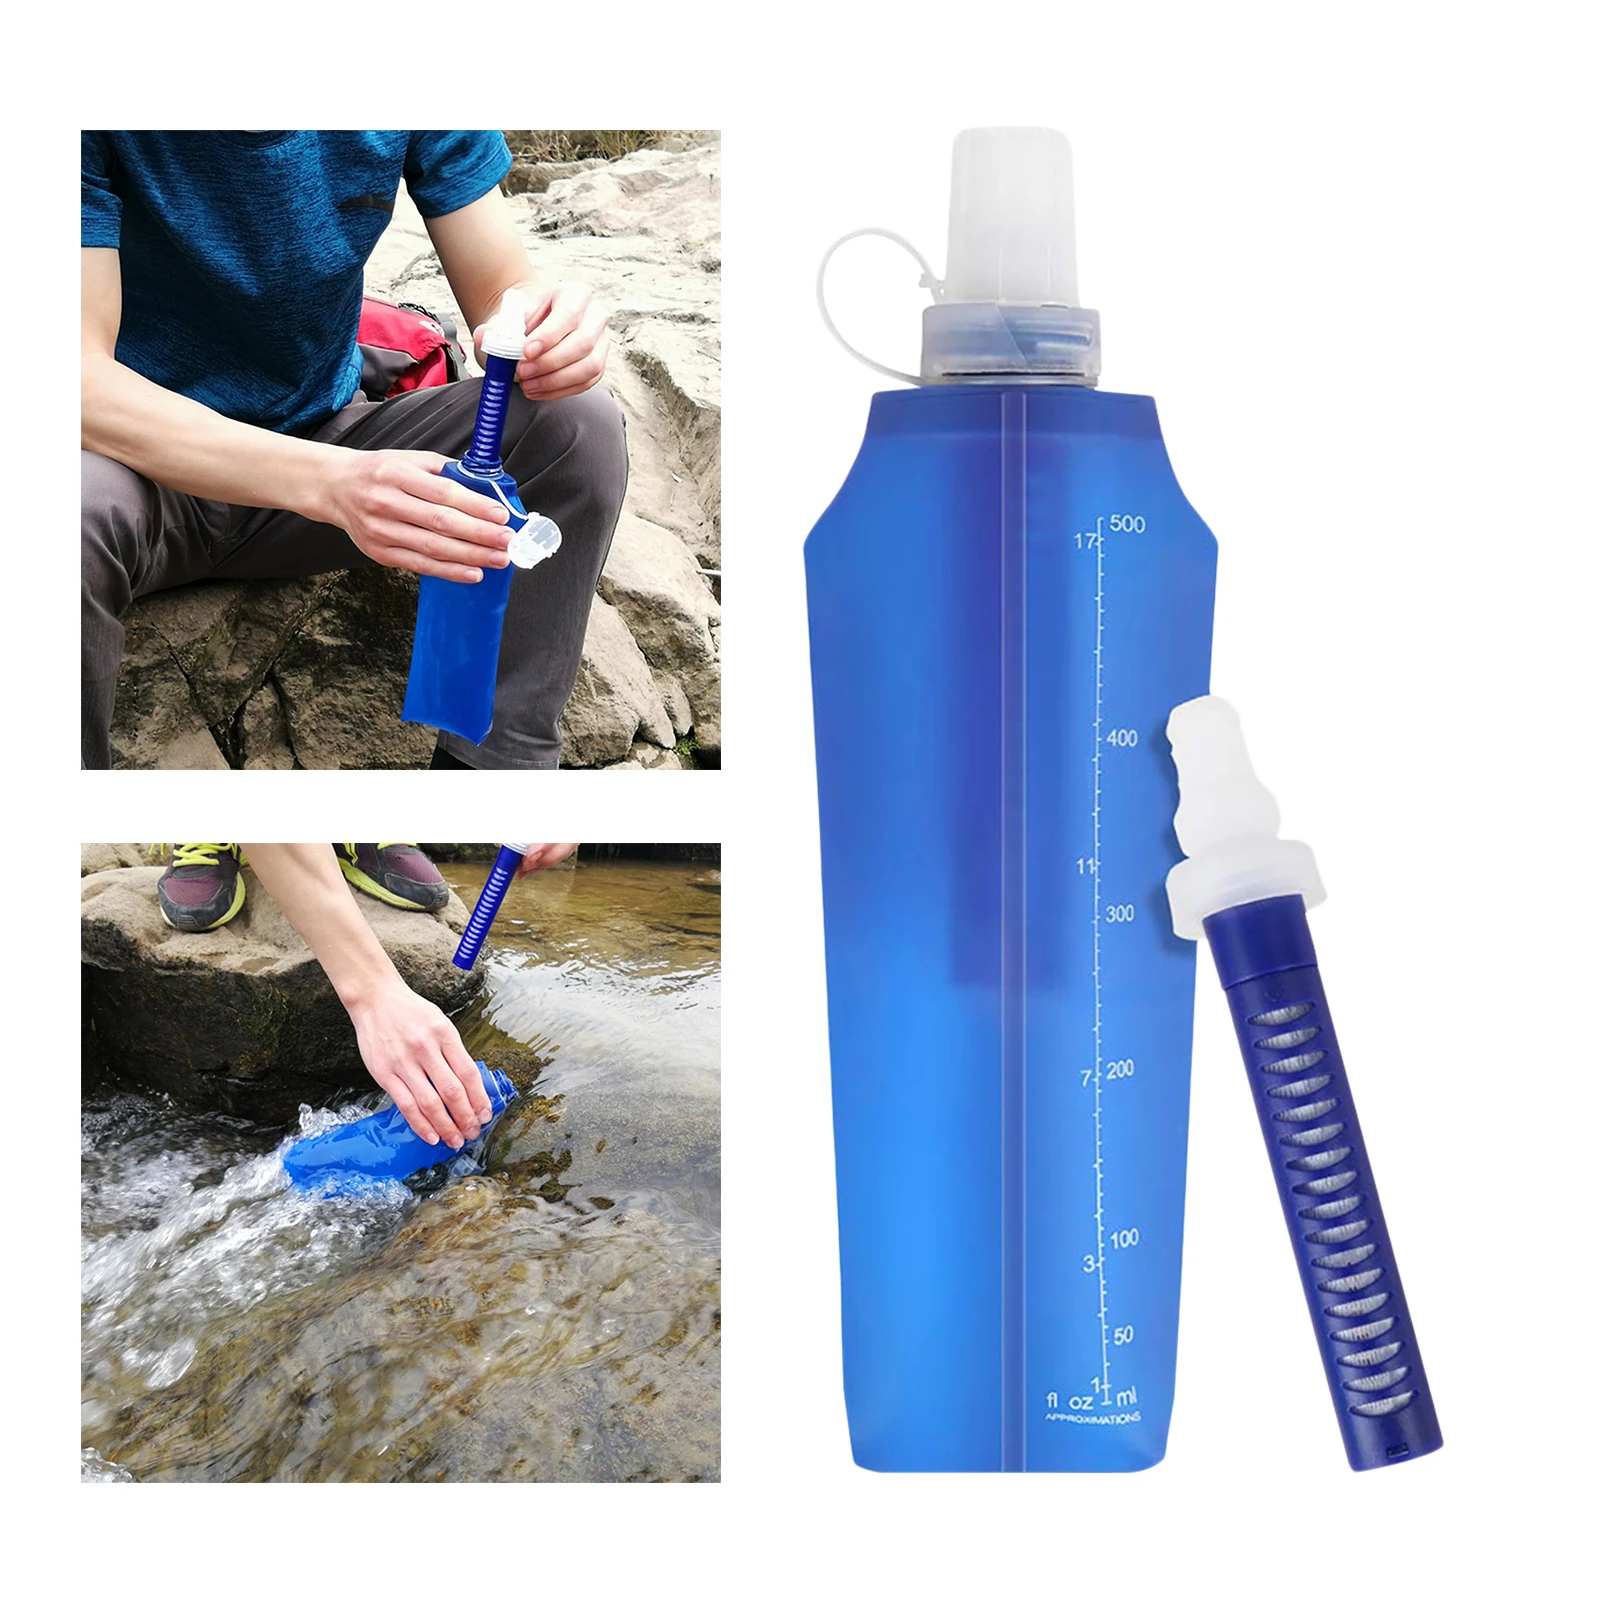 Collapsible Water Bottle with Filter Straw Water Bag Water Filtration System Drinking Purifier for Camping Hiking Backpacking